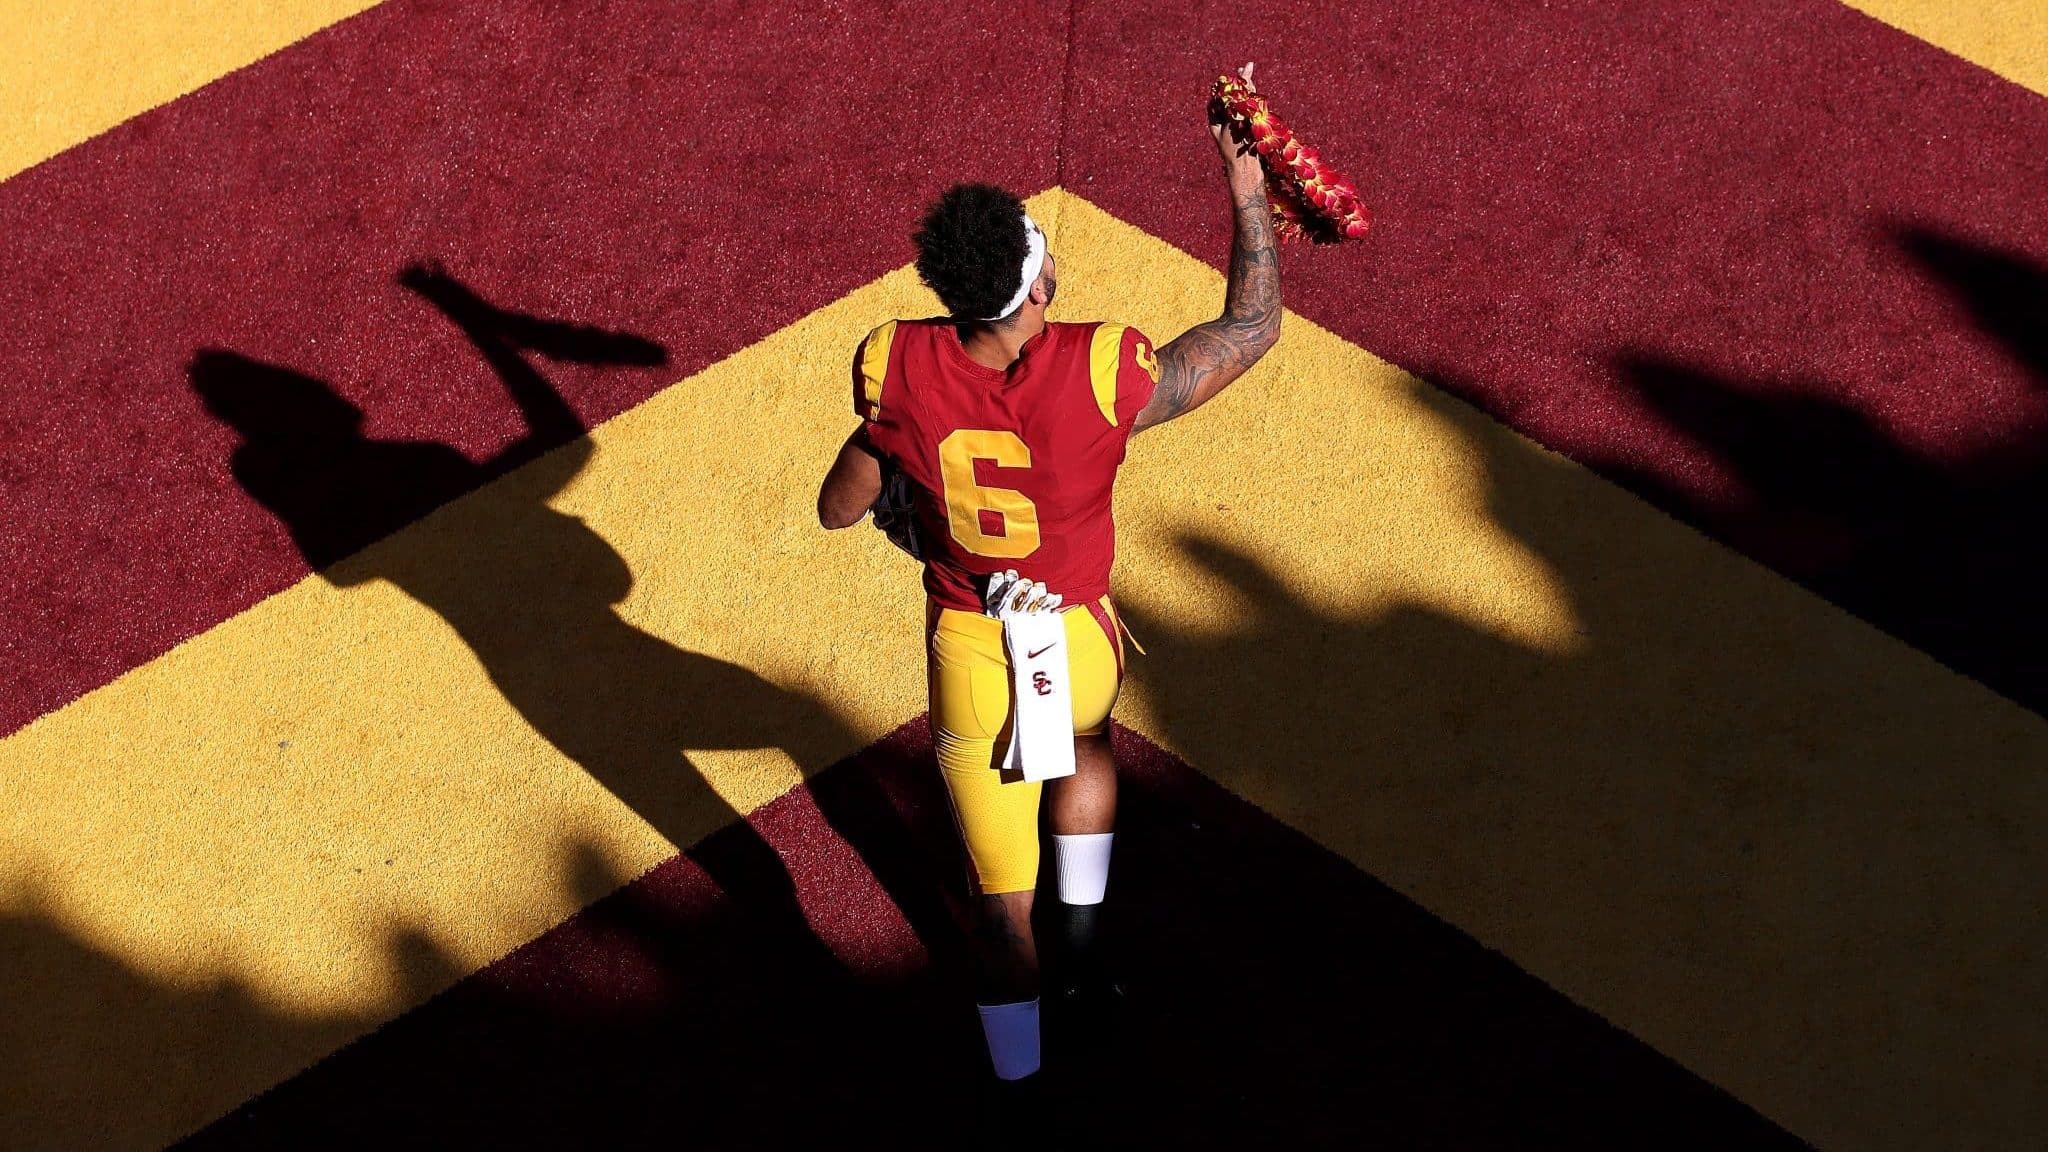 LOS ANGELES, CALIFORNIA - NOVEMBER 23: Michael Pittman Jr. #6 of the USC Trojans runs onto the field prior to a game against the UCLA Bruins at Los Angeles Memorial Coliseum on November 23, 2019 in Los Angeles, California.